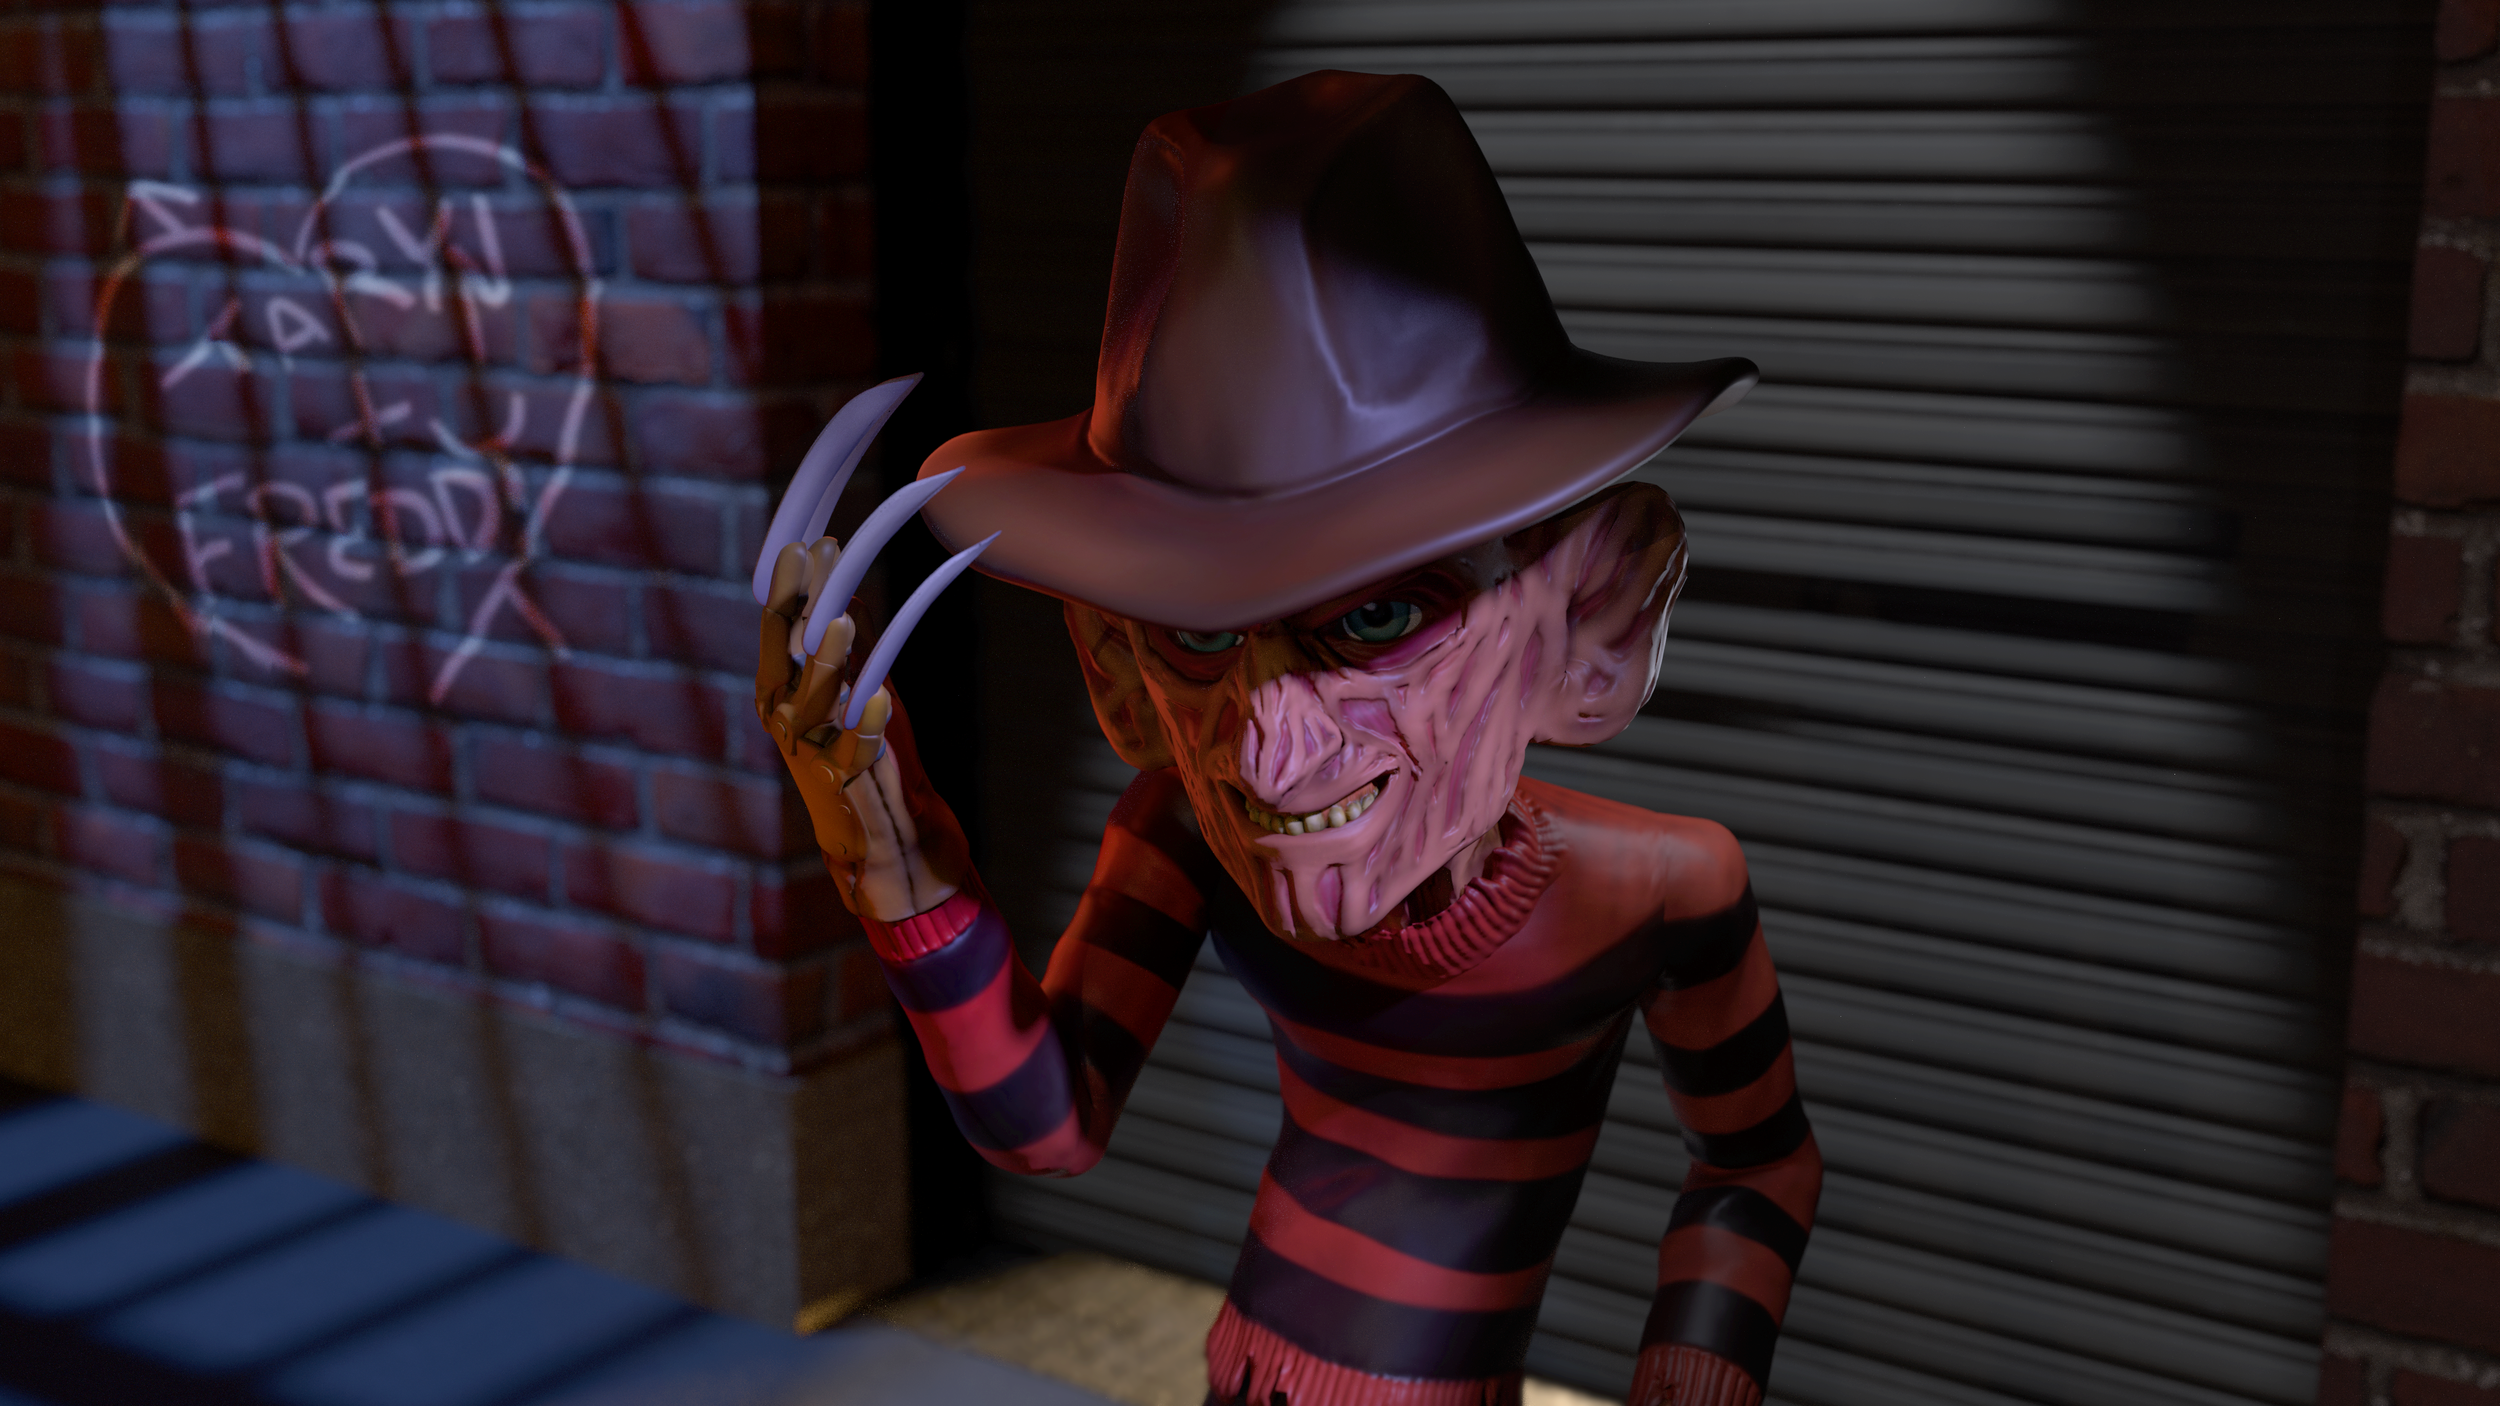 Freddy_Alley_Close bright.png